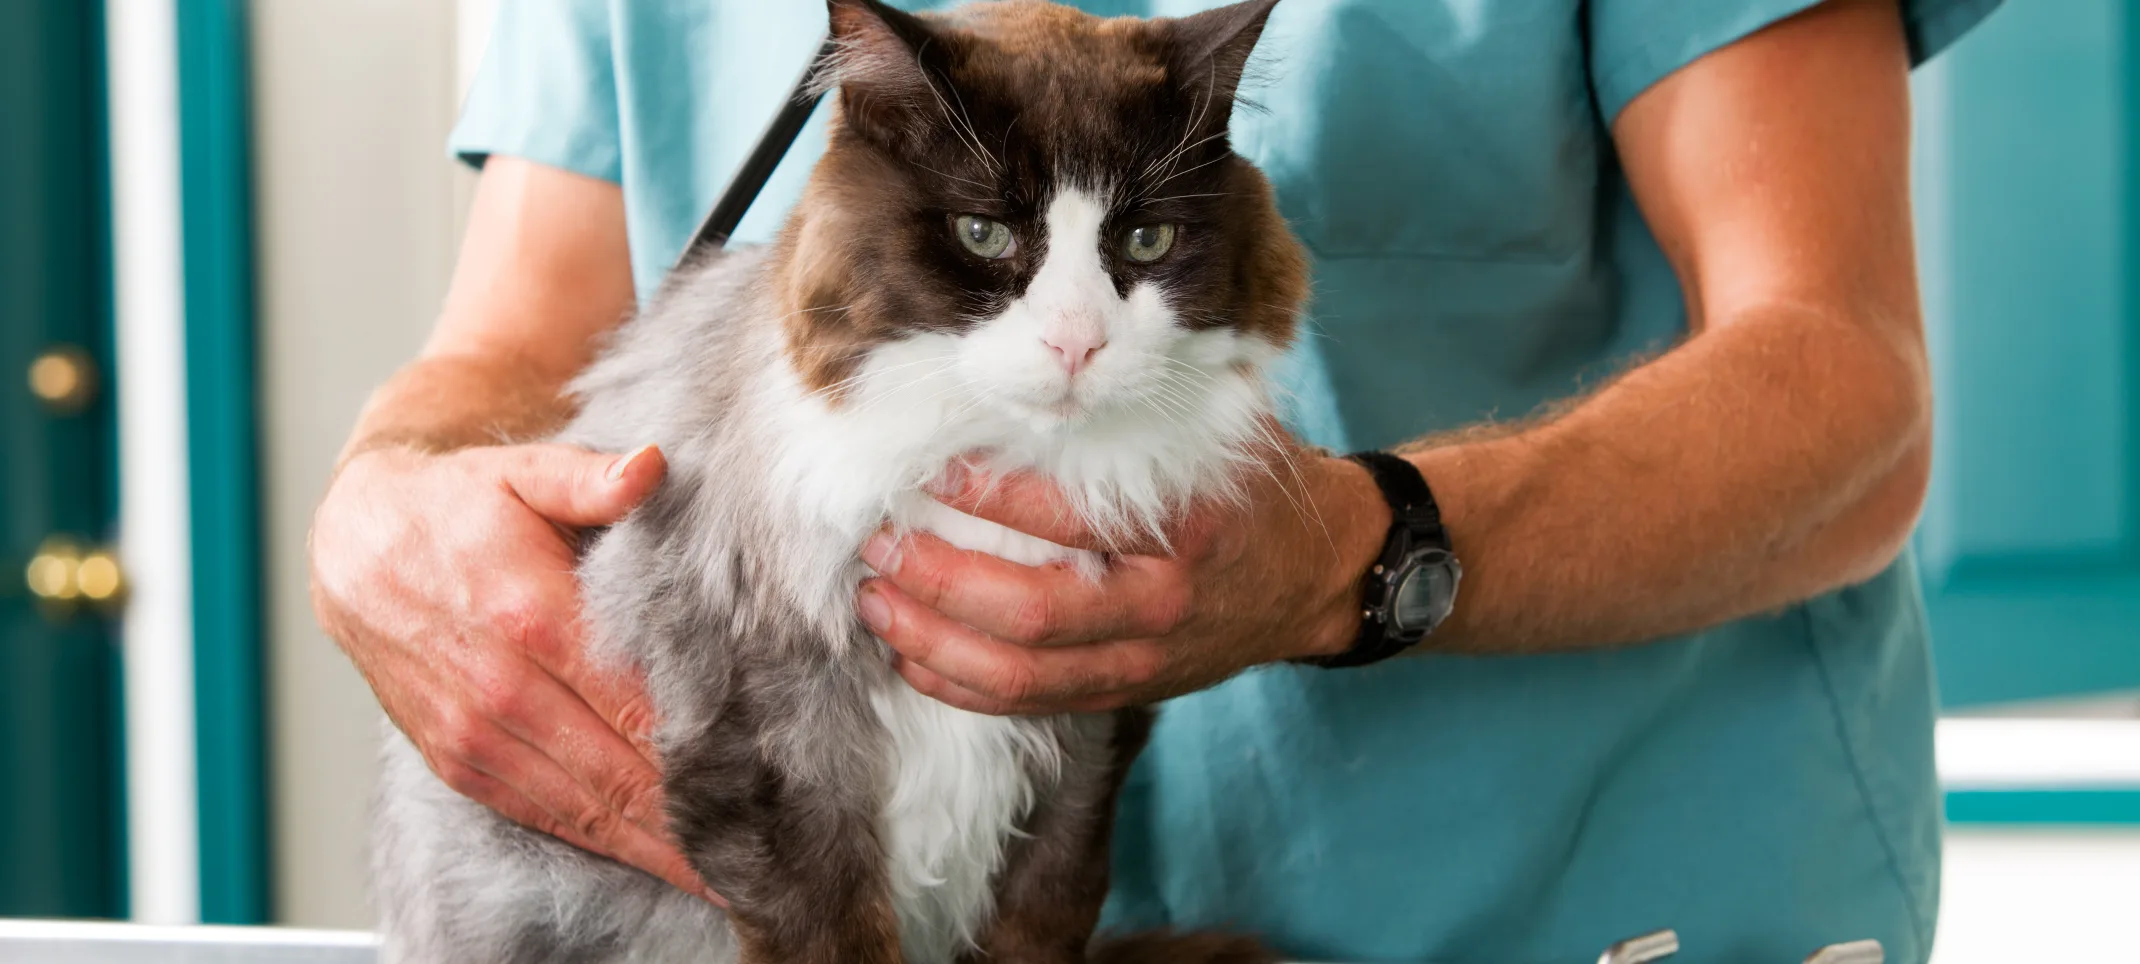 Cat being handled by veterinary staff